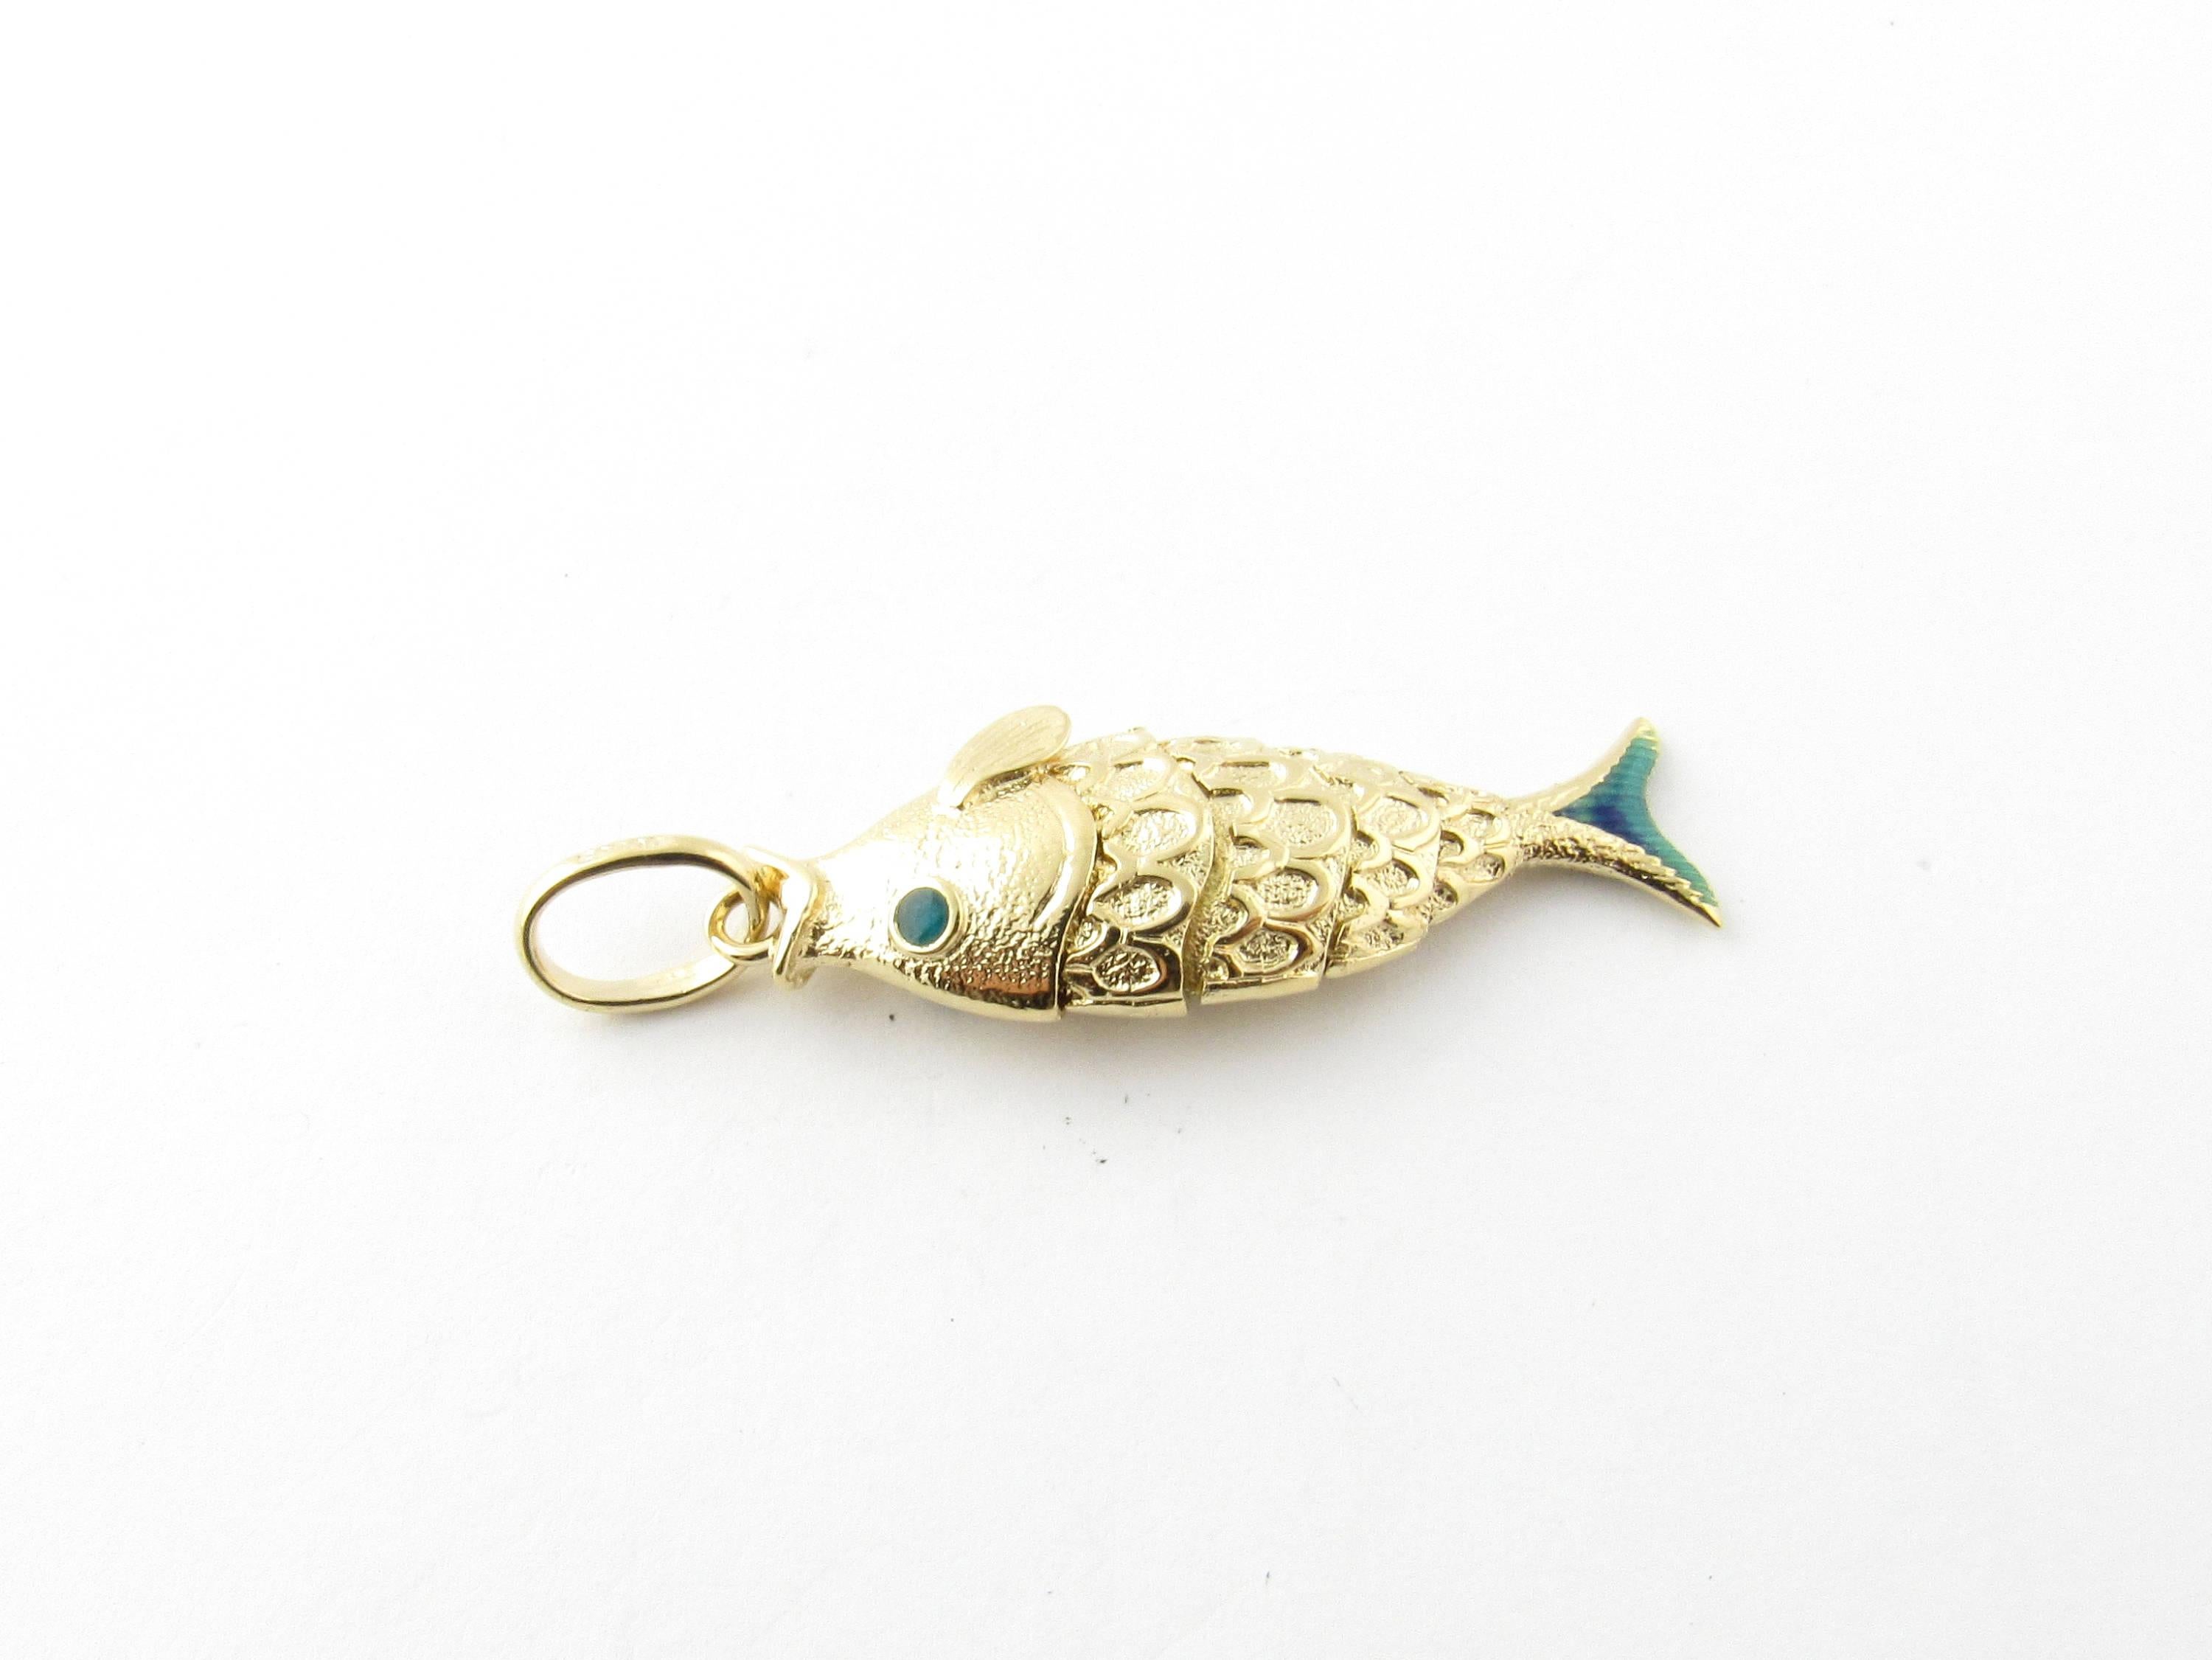 Vintage 18 Karat Yellow Gold Articulated Fish Pendant-

Gone fishing!

This 3D articulated pendant features a flexible fish that wriggles back and forth realistically. Meticulously detailed in 18K yellow gold and accented with green enamel.

Size: 